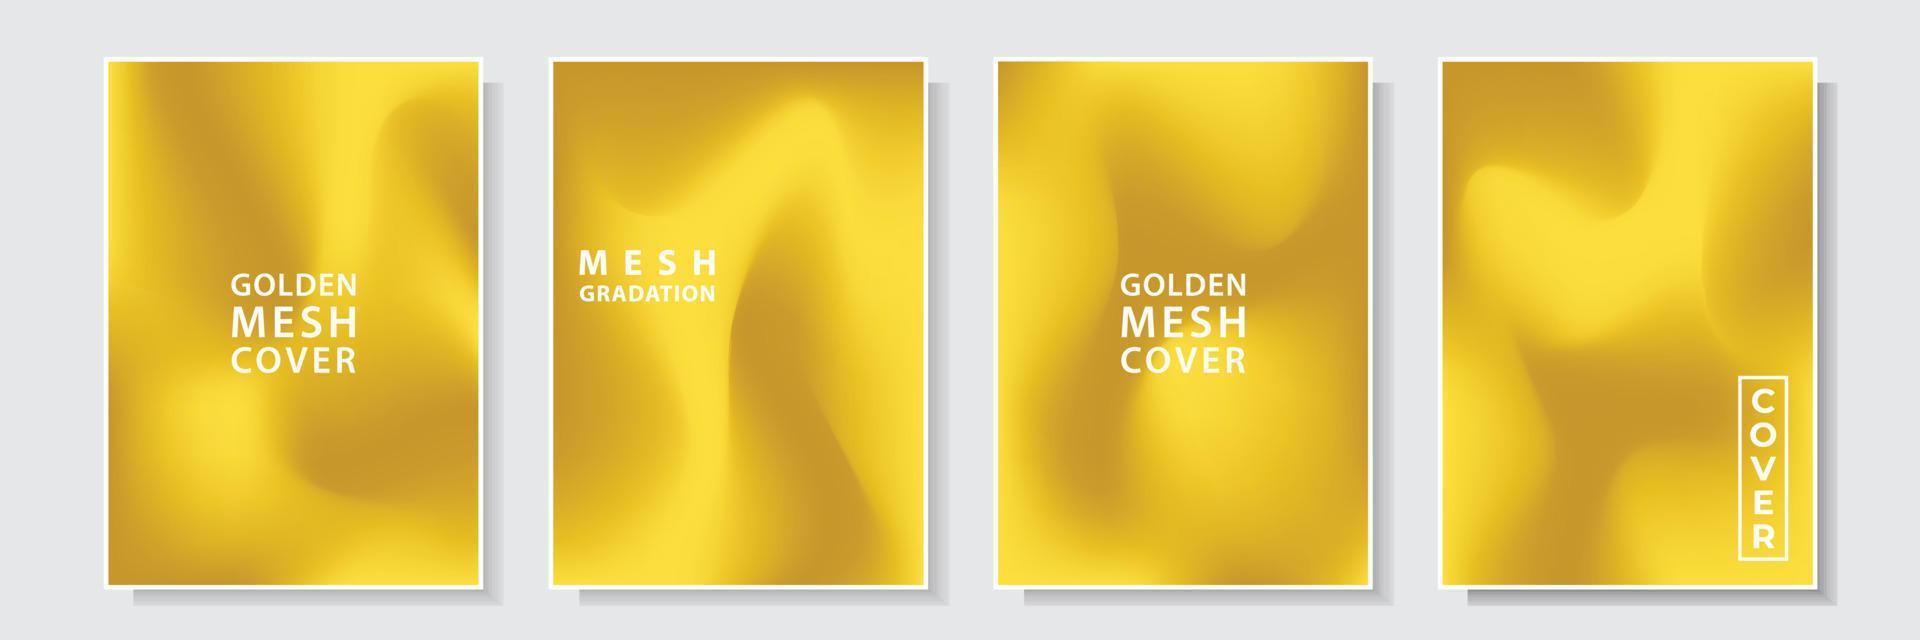 gradation mesh golden abstract art color style luxury cover template, fluid art, set collection design vector